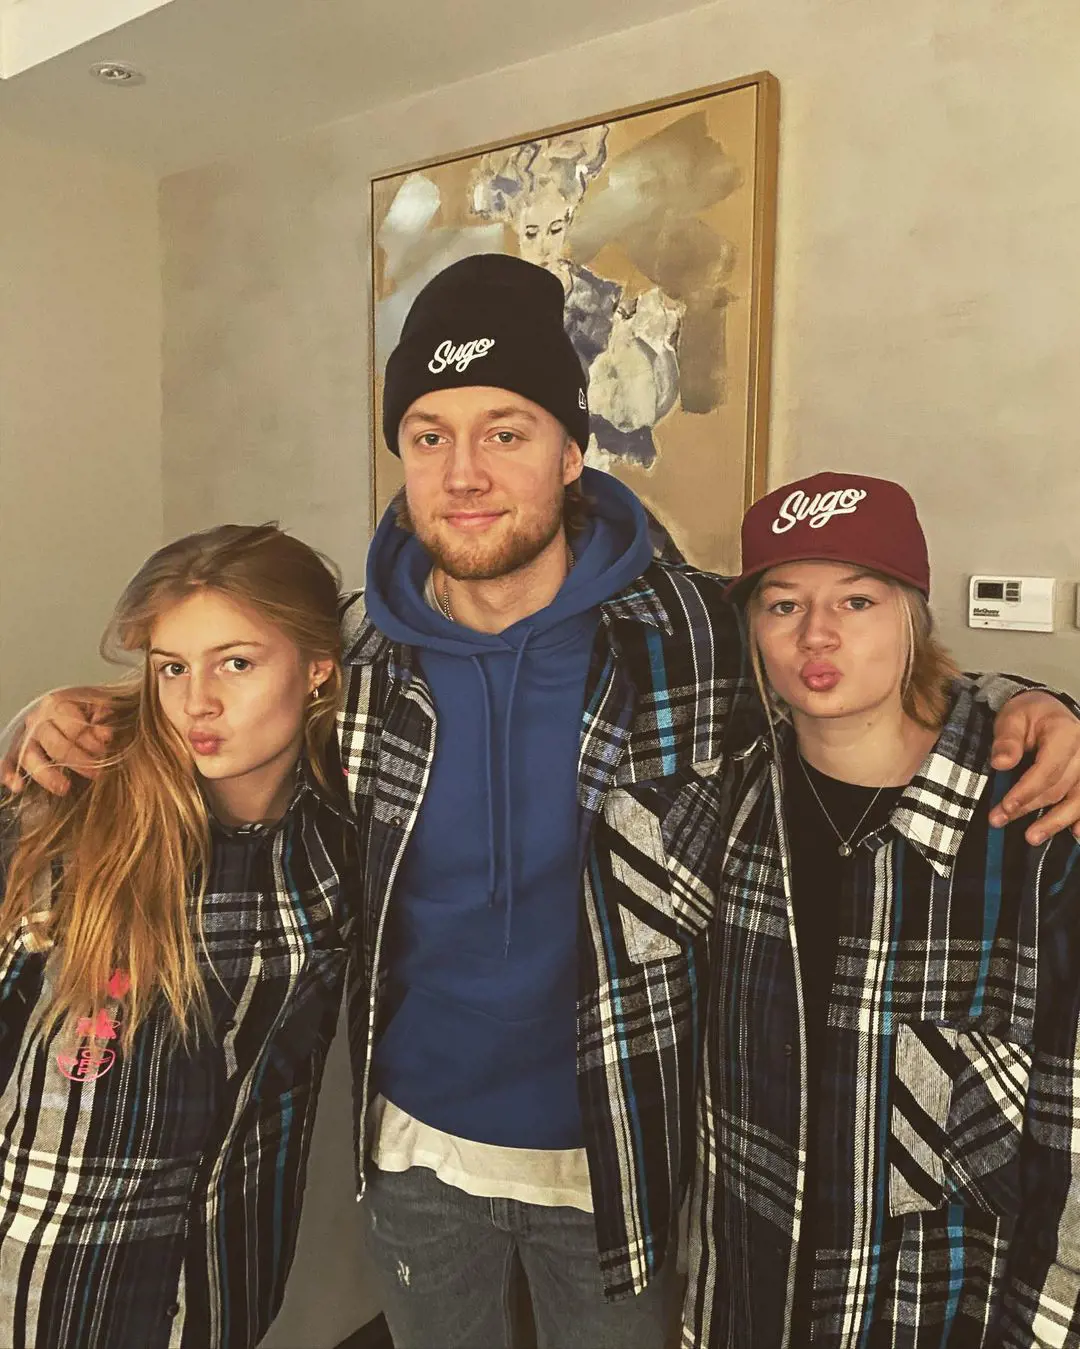 Alex poses for a photo with his sisters in a similar jacket in January 2020